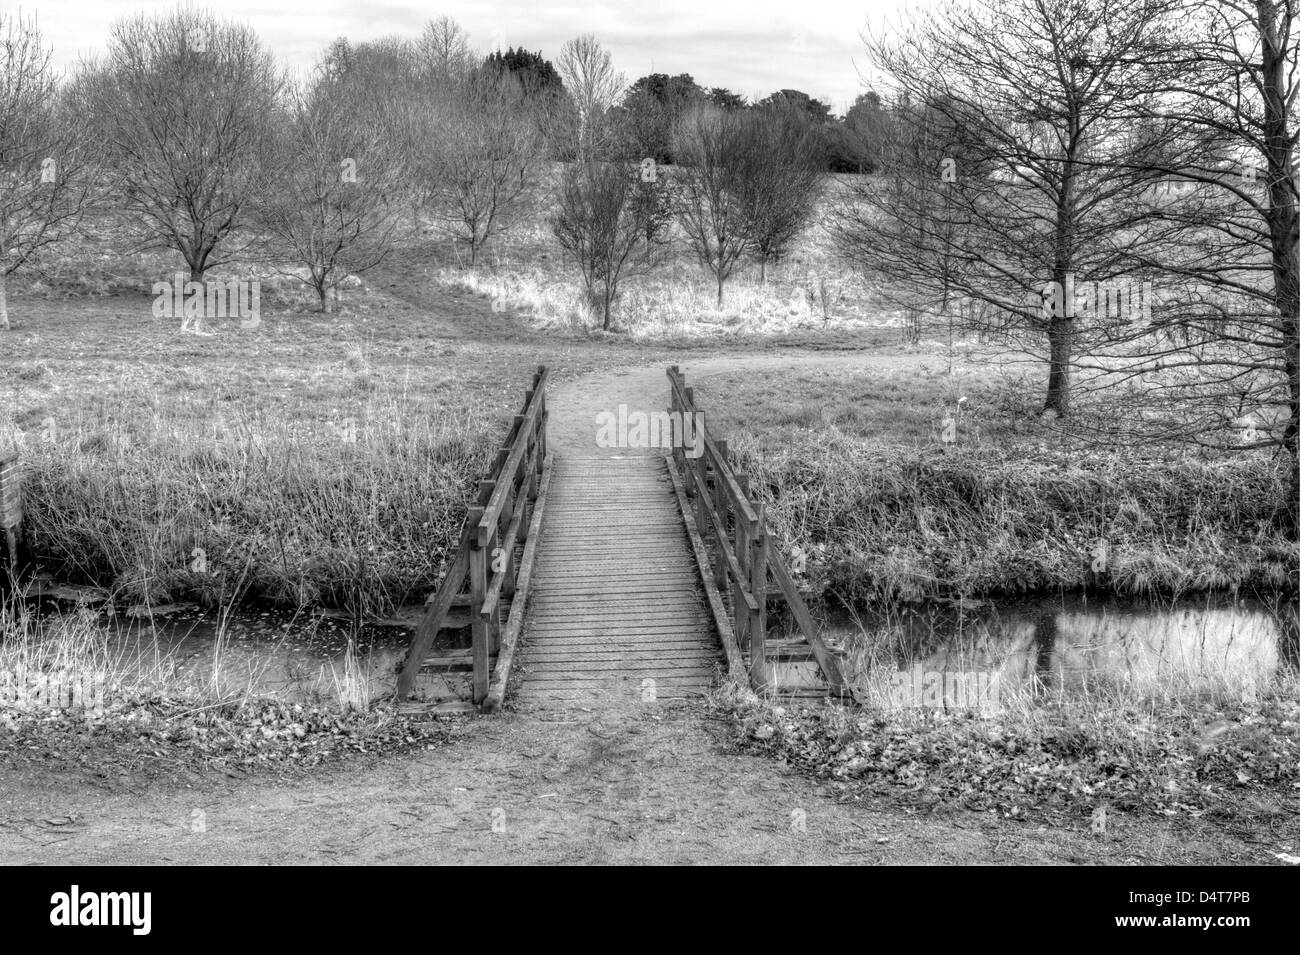 Marks Hall Estate. A view of the English countryside. A bridge over river in an english countryside scene on a stormy day Stock Photo